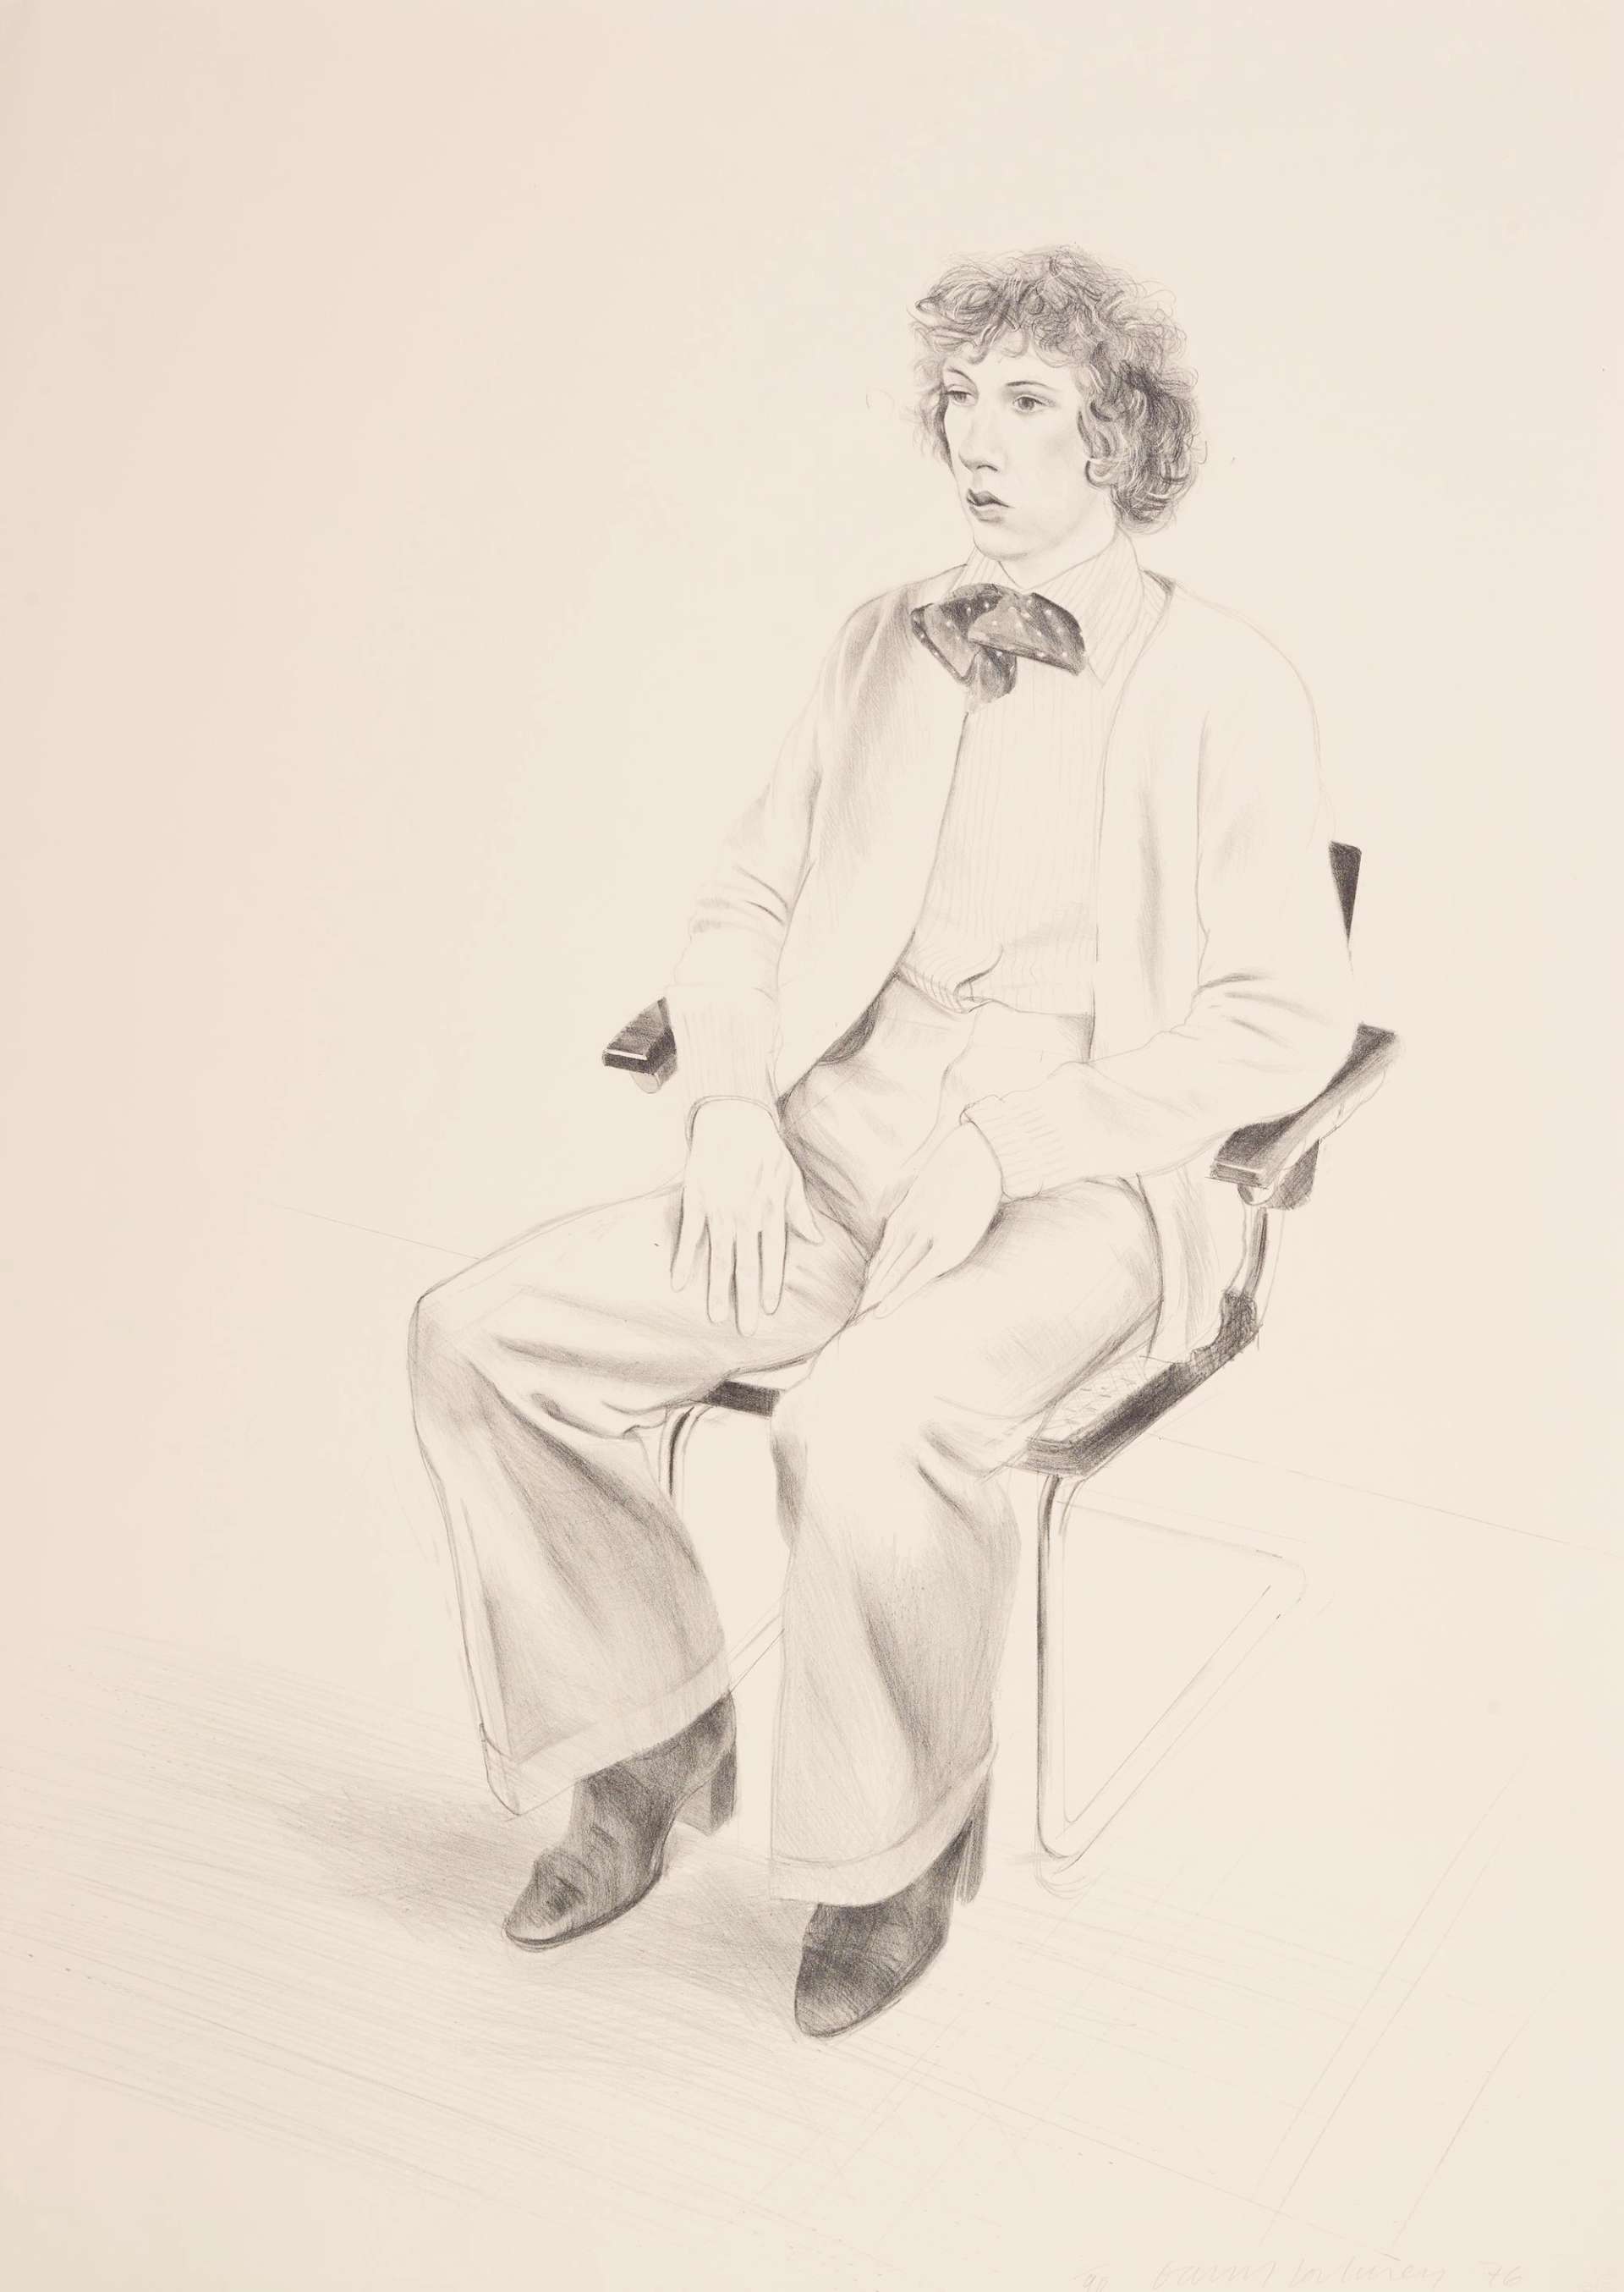 David Hockney’s Gregory Evans. A lithographic print of a man, seated, dressed in a suit and bow tie.